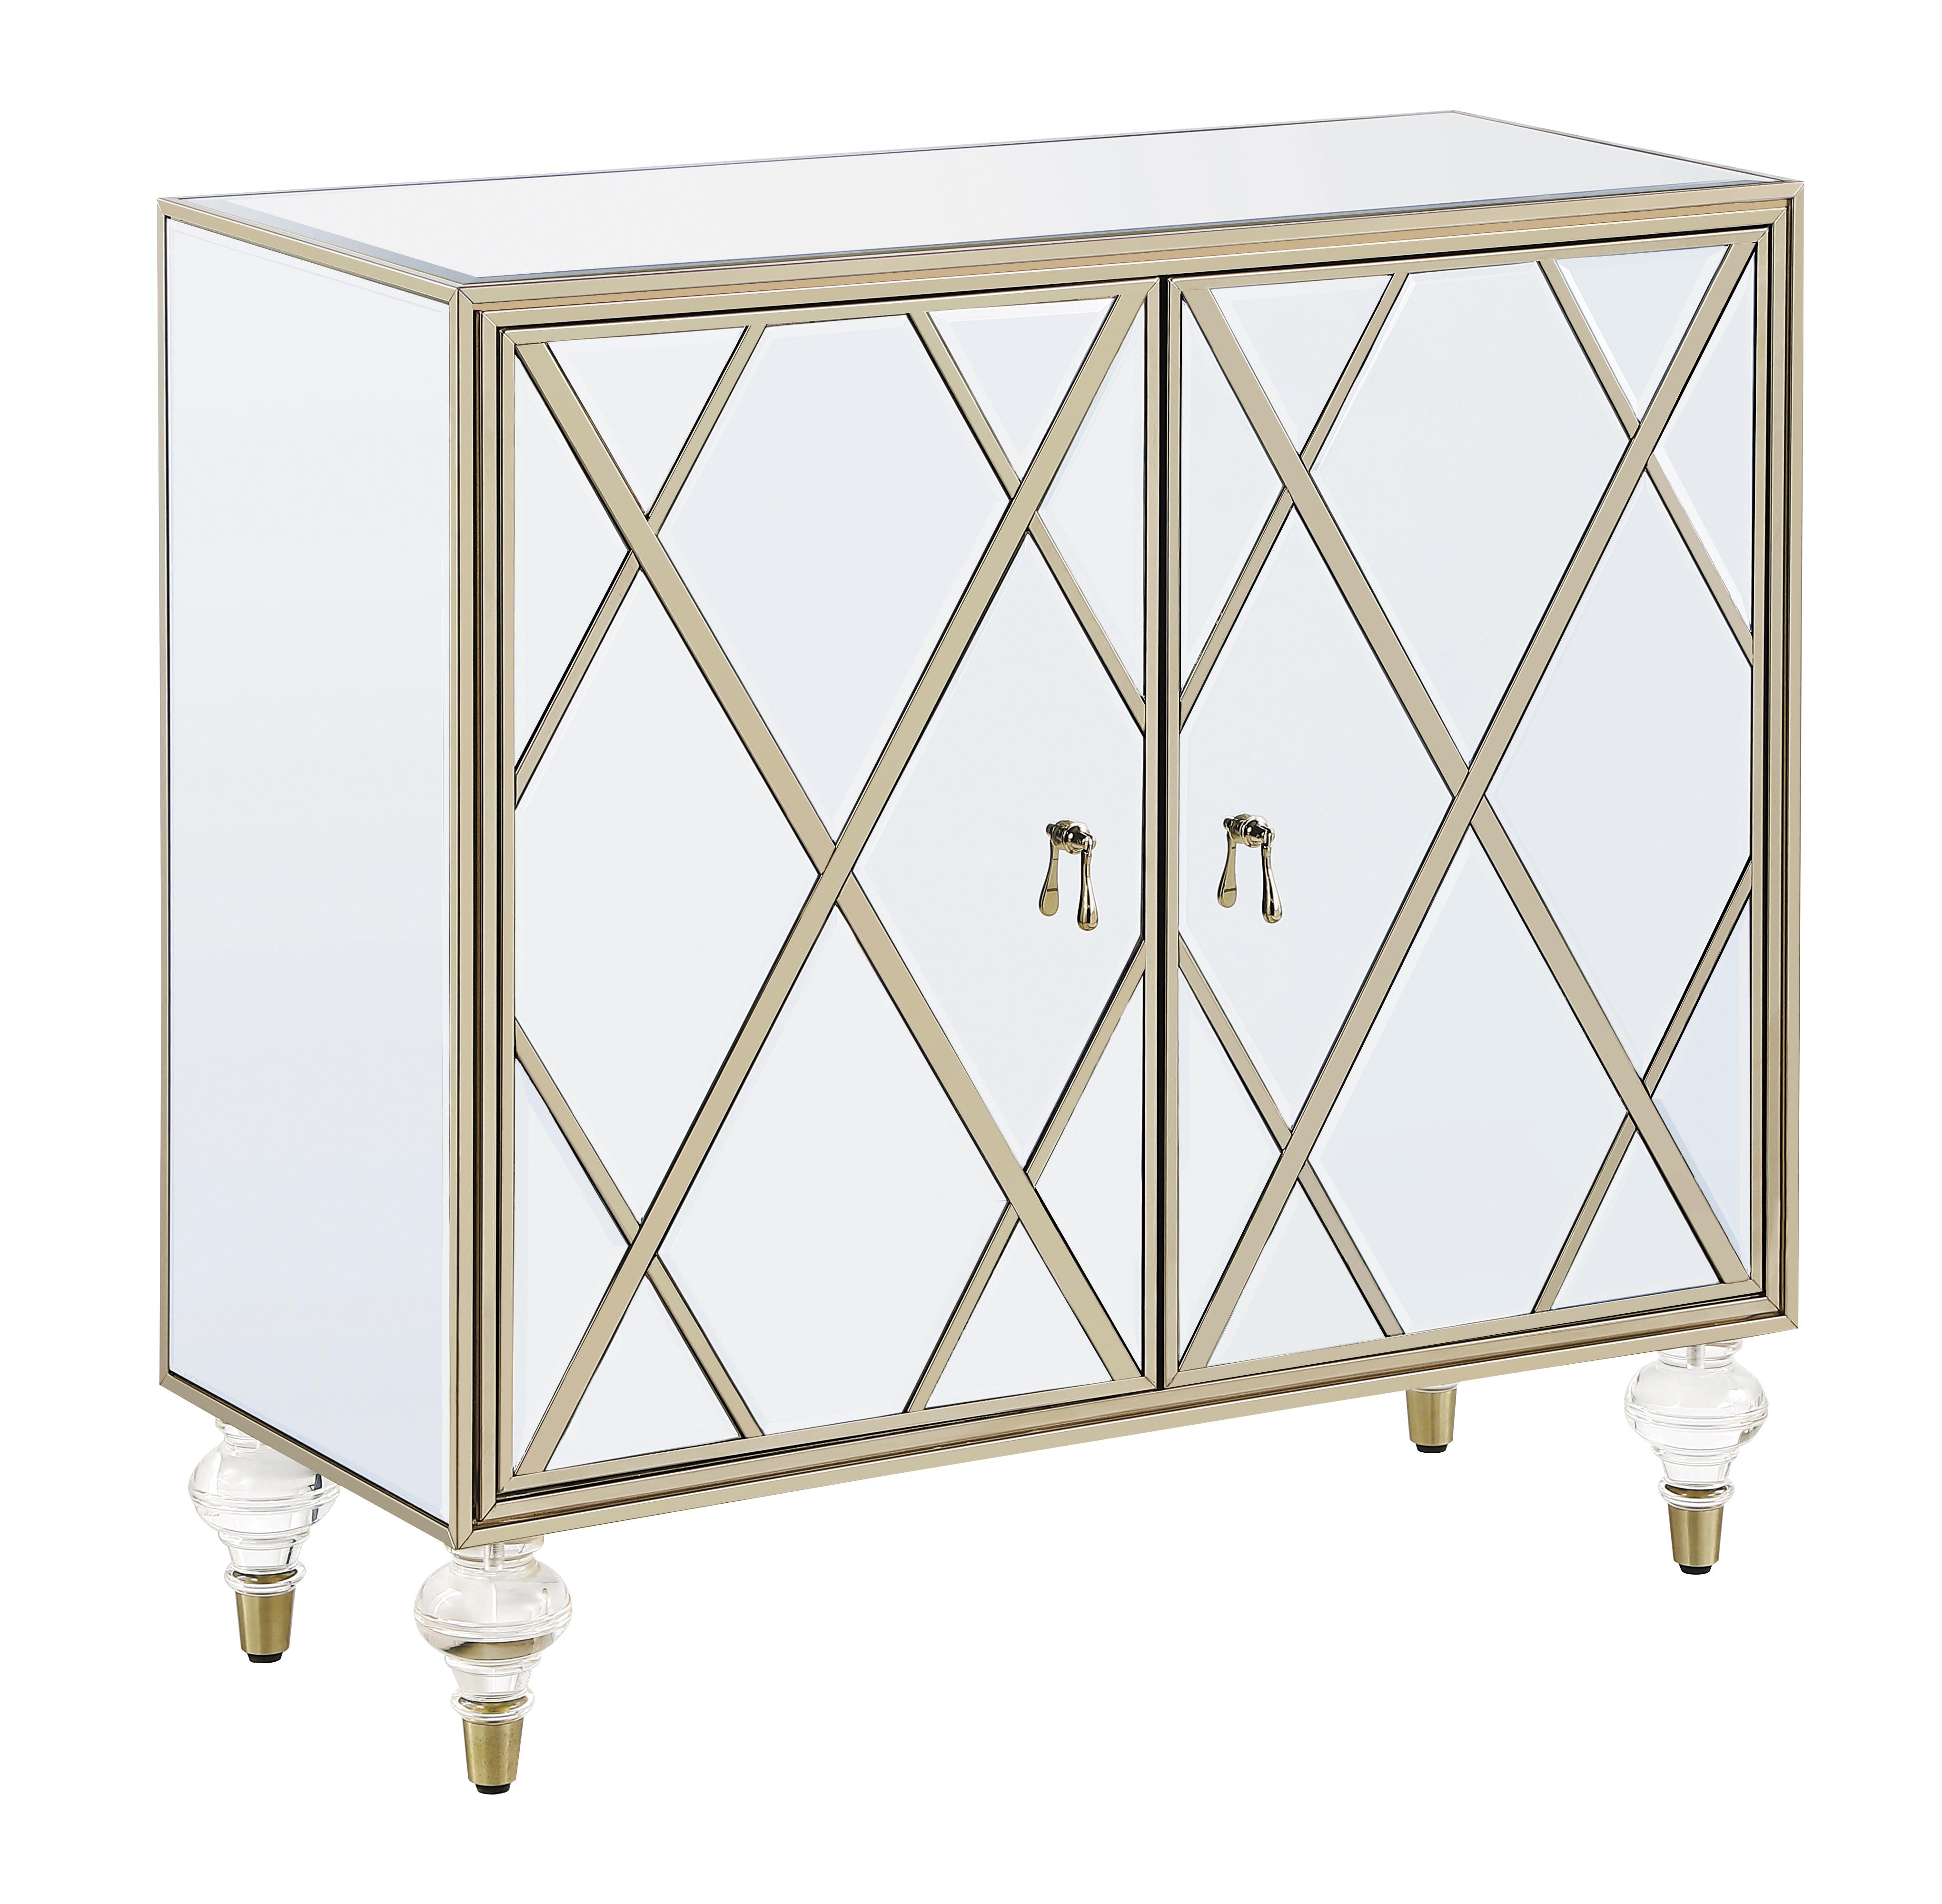 Contemporary Accent Cabinet 951851 951851 in Mirrored, Champagne 